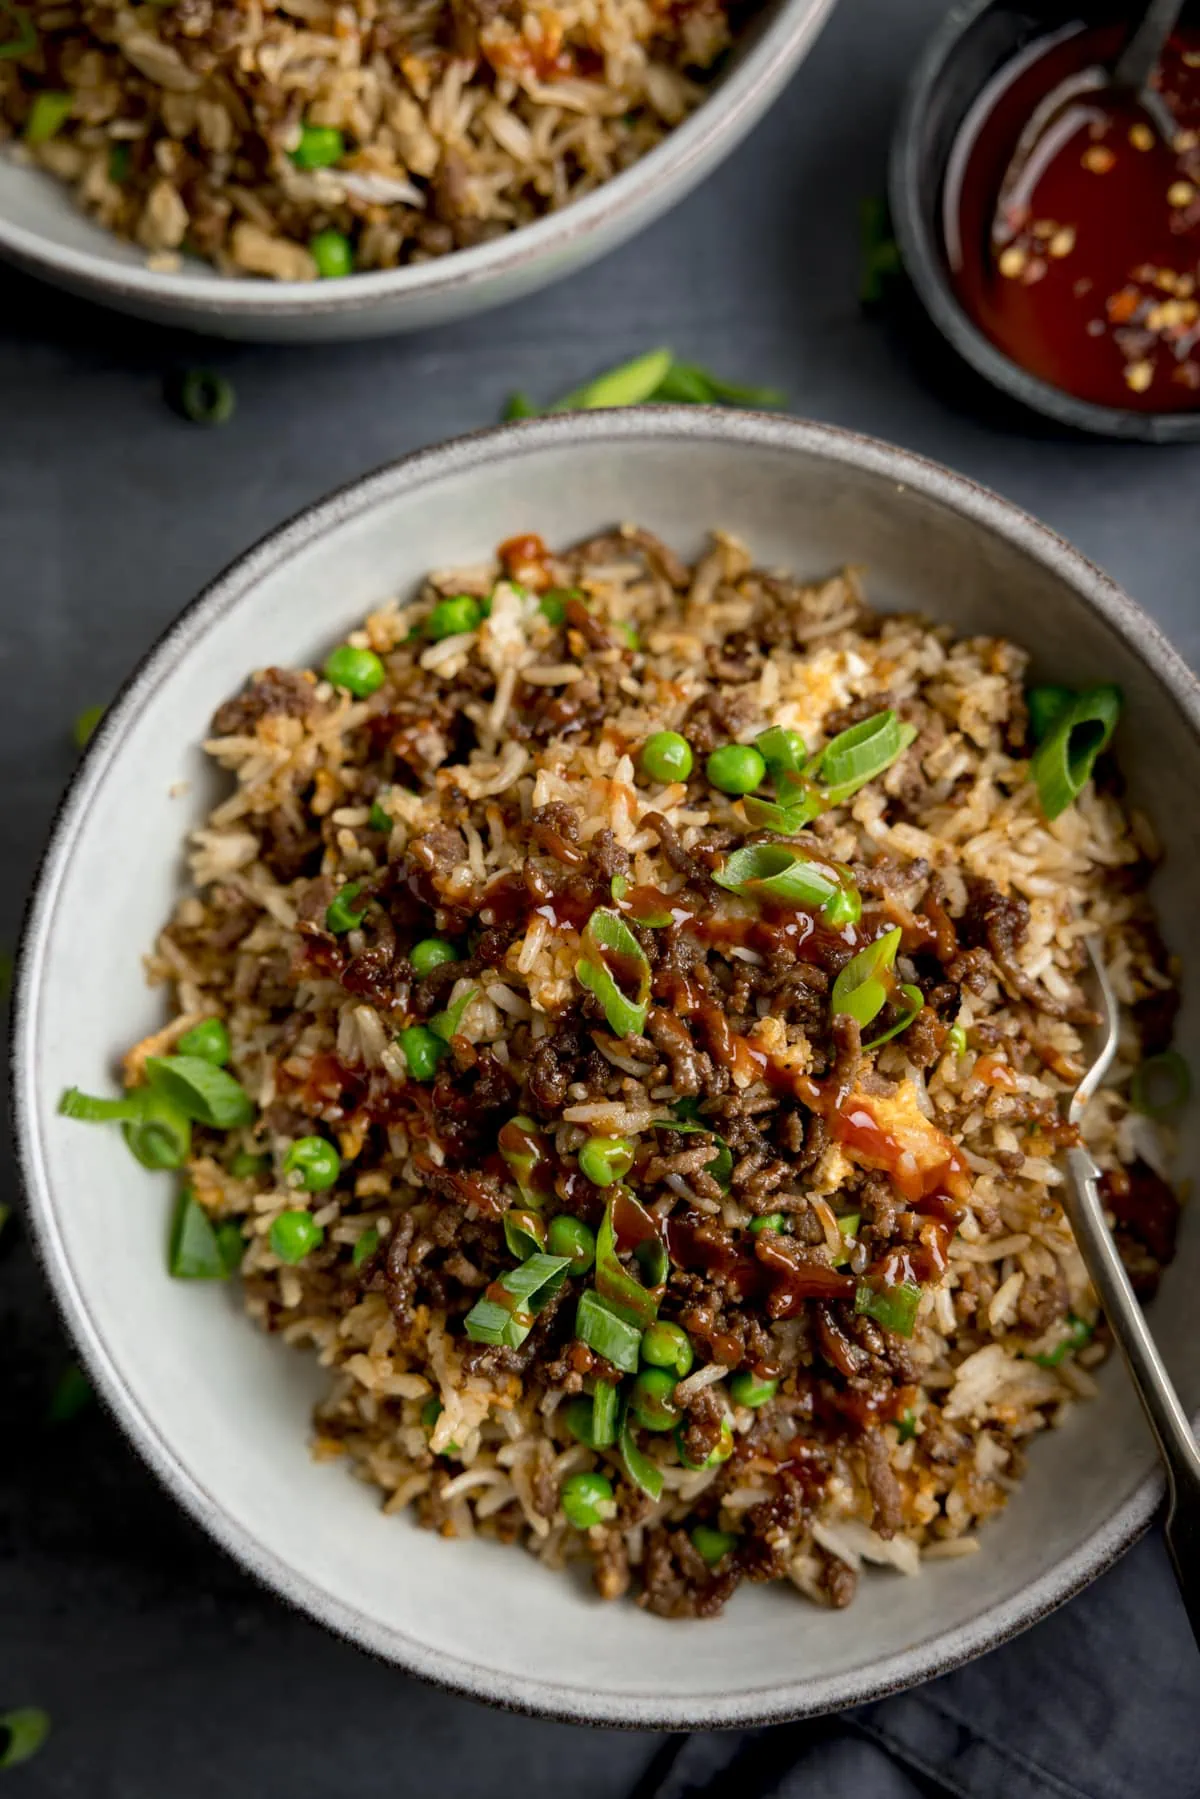 https://www.kitchensanctuary.com/wp-content/uploads/2022/09/Mince-Beef-Fried-Rice-tall1-52-1.webp